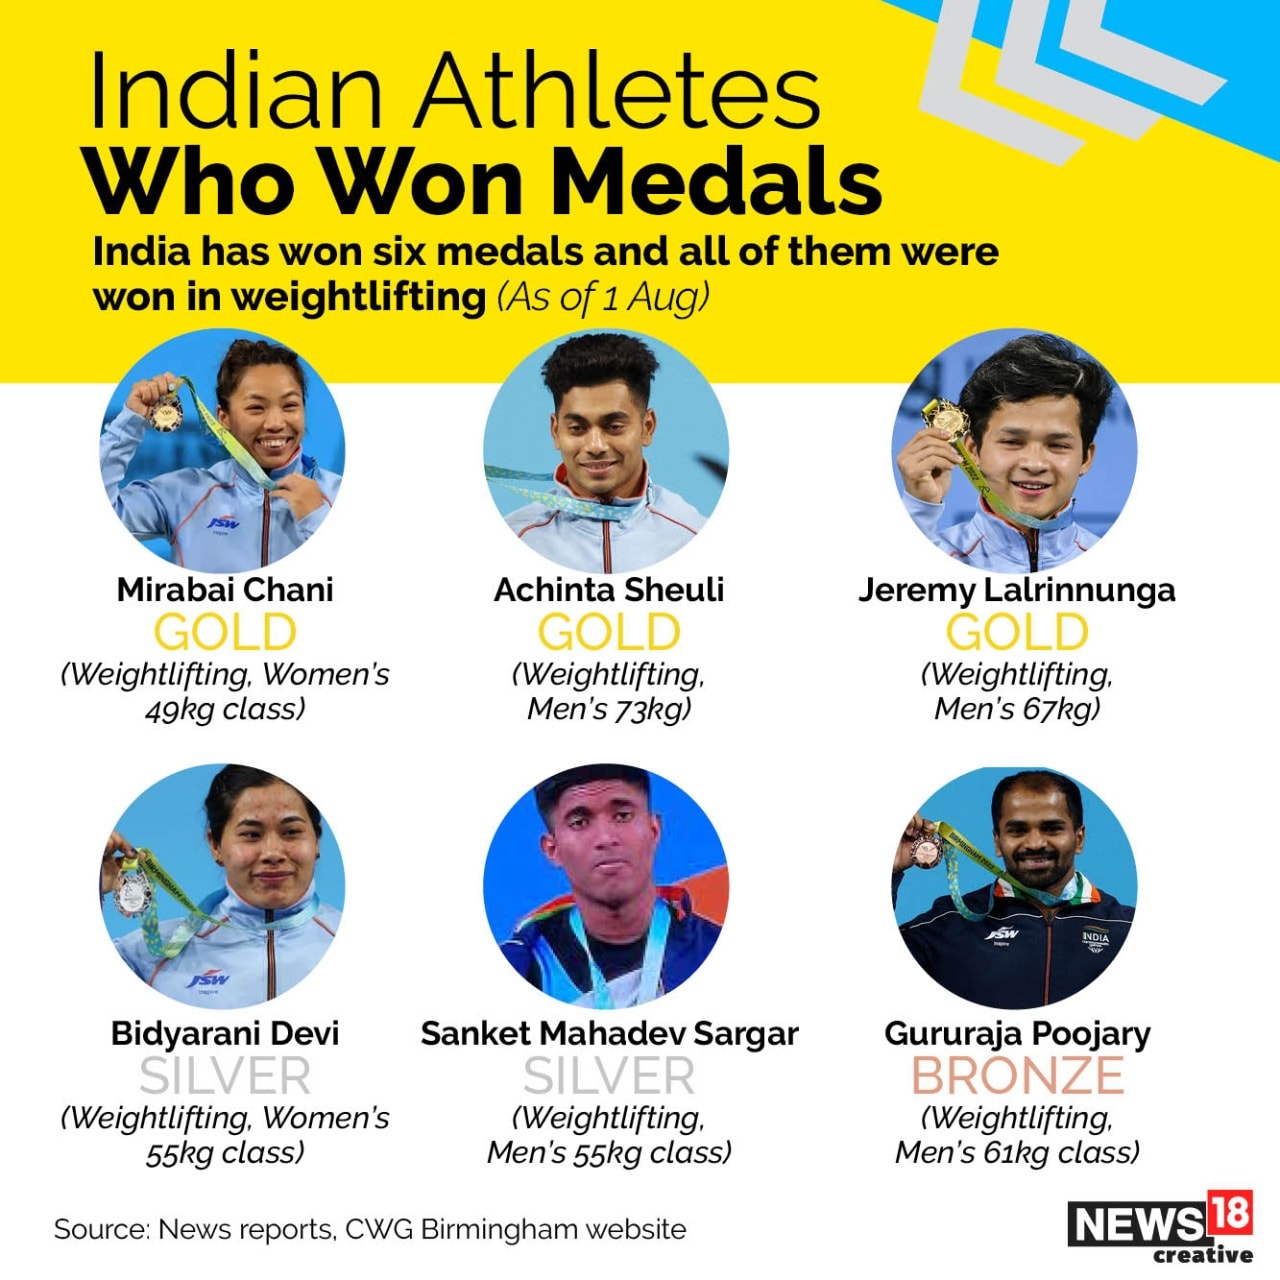 All of India's six medals, so far, were won in Weightlifting